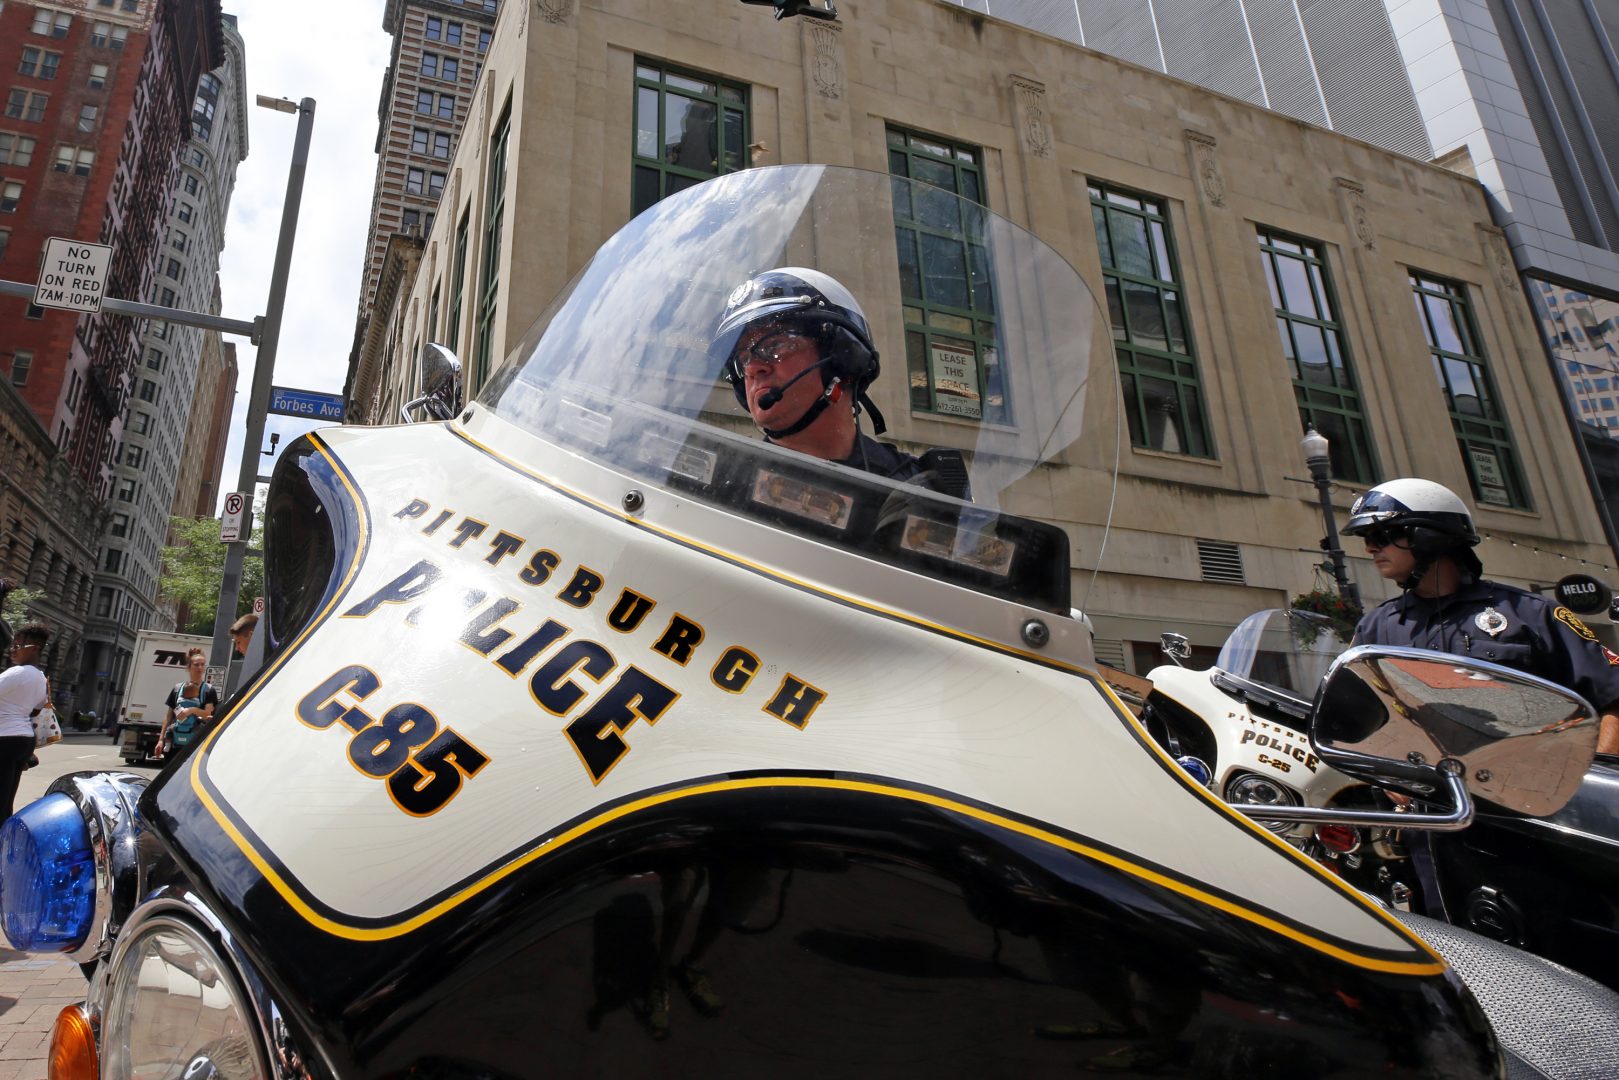 Pittsburgh Police motorcycle officers watch as a rally and protest over the police shooting of Antwon Rose II blocks the intersection of Fifth Ave. and Wood Street in downtown Pittsburgh during the lunch hour on Friday, July 27, 2018.